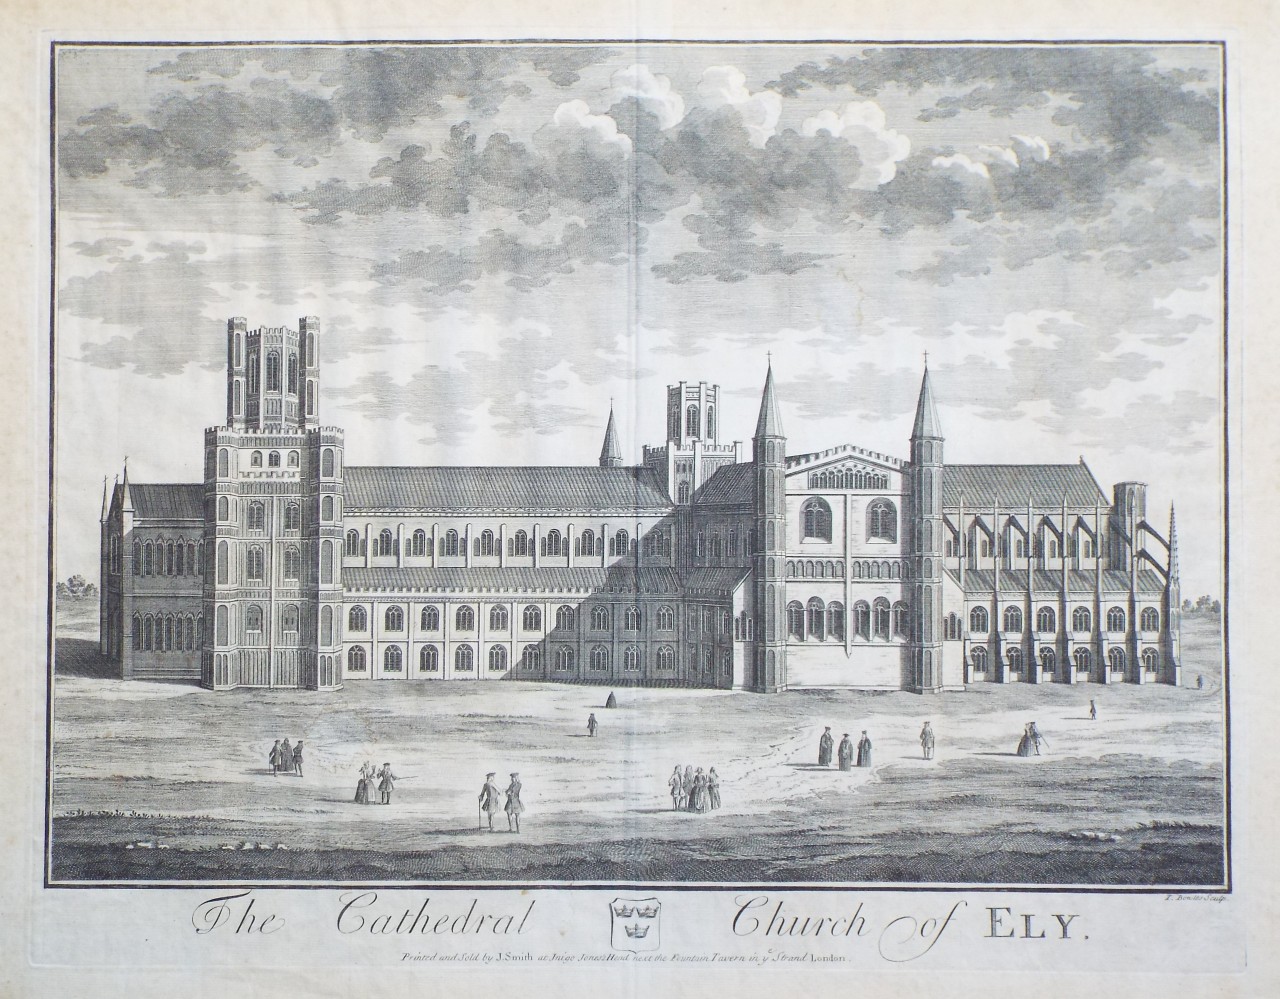 Print - The Cathedral Church of Ely. - Bowles